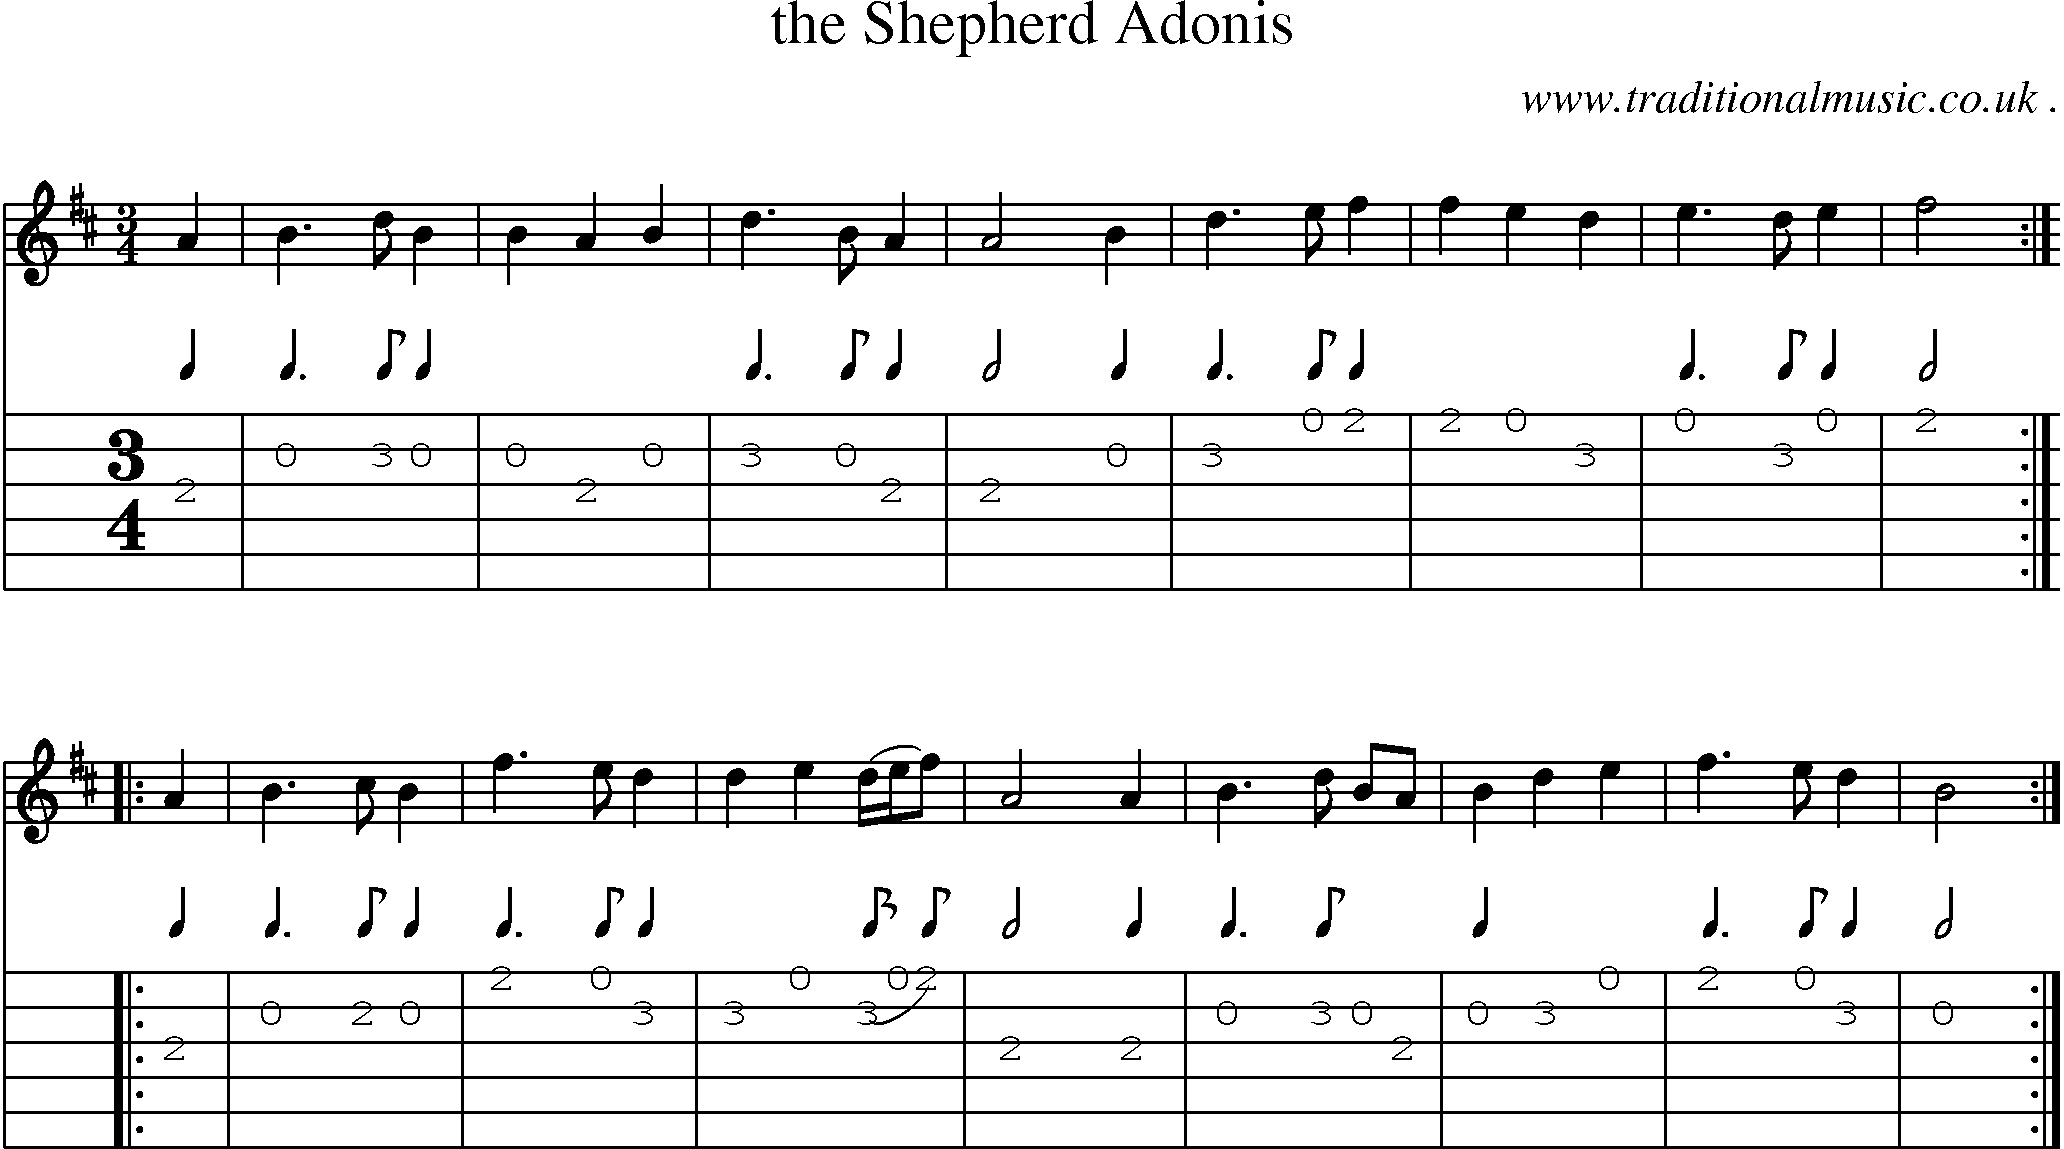 Sheet-Music and Guitar Tabs for The Shepherd Adonis